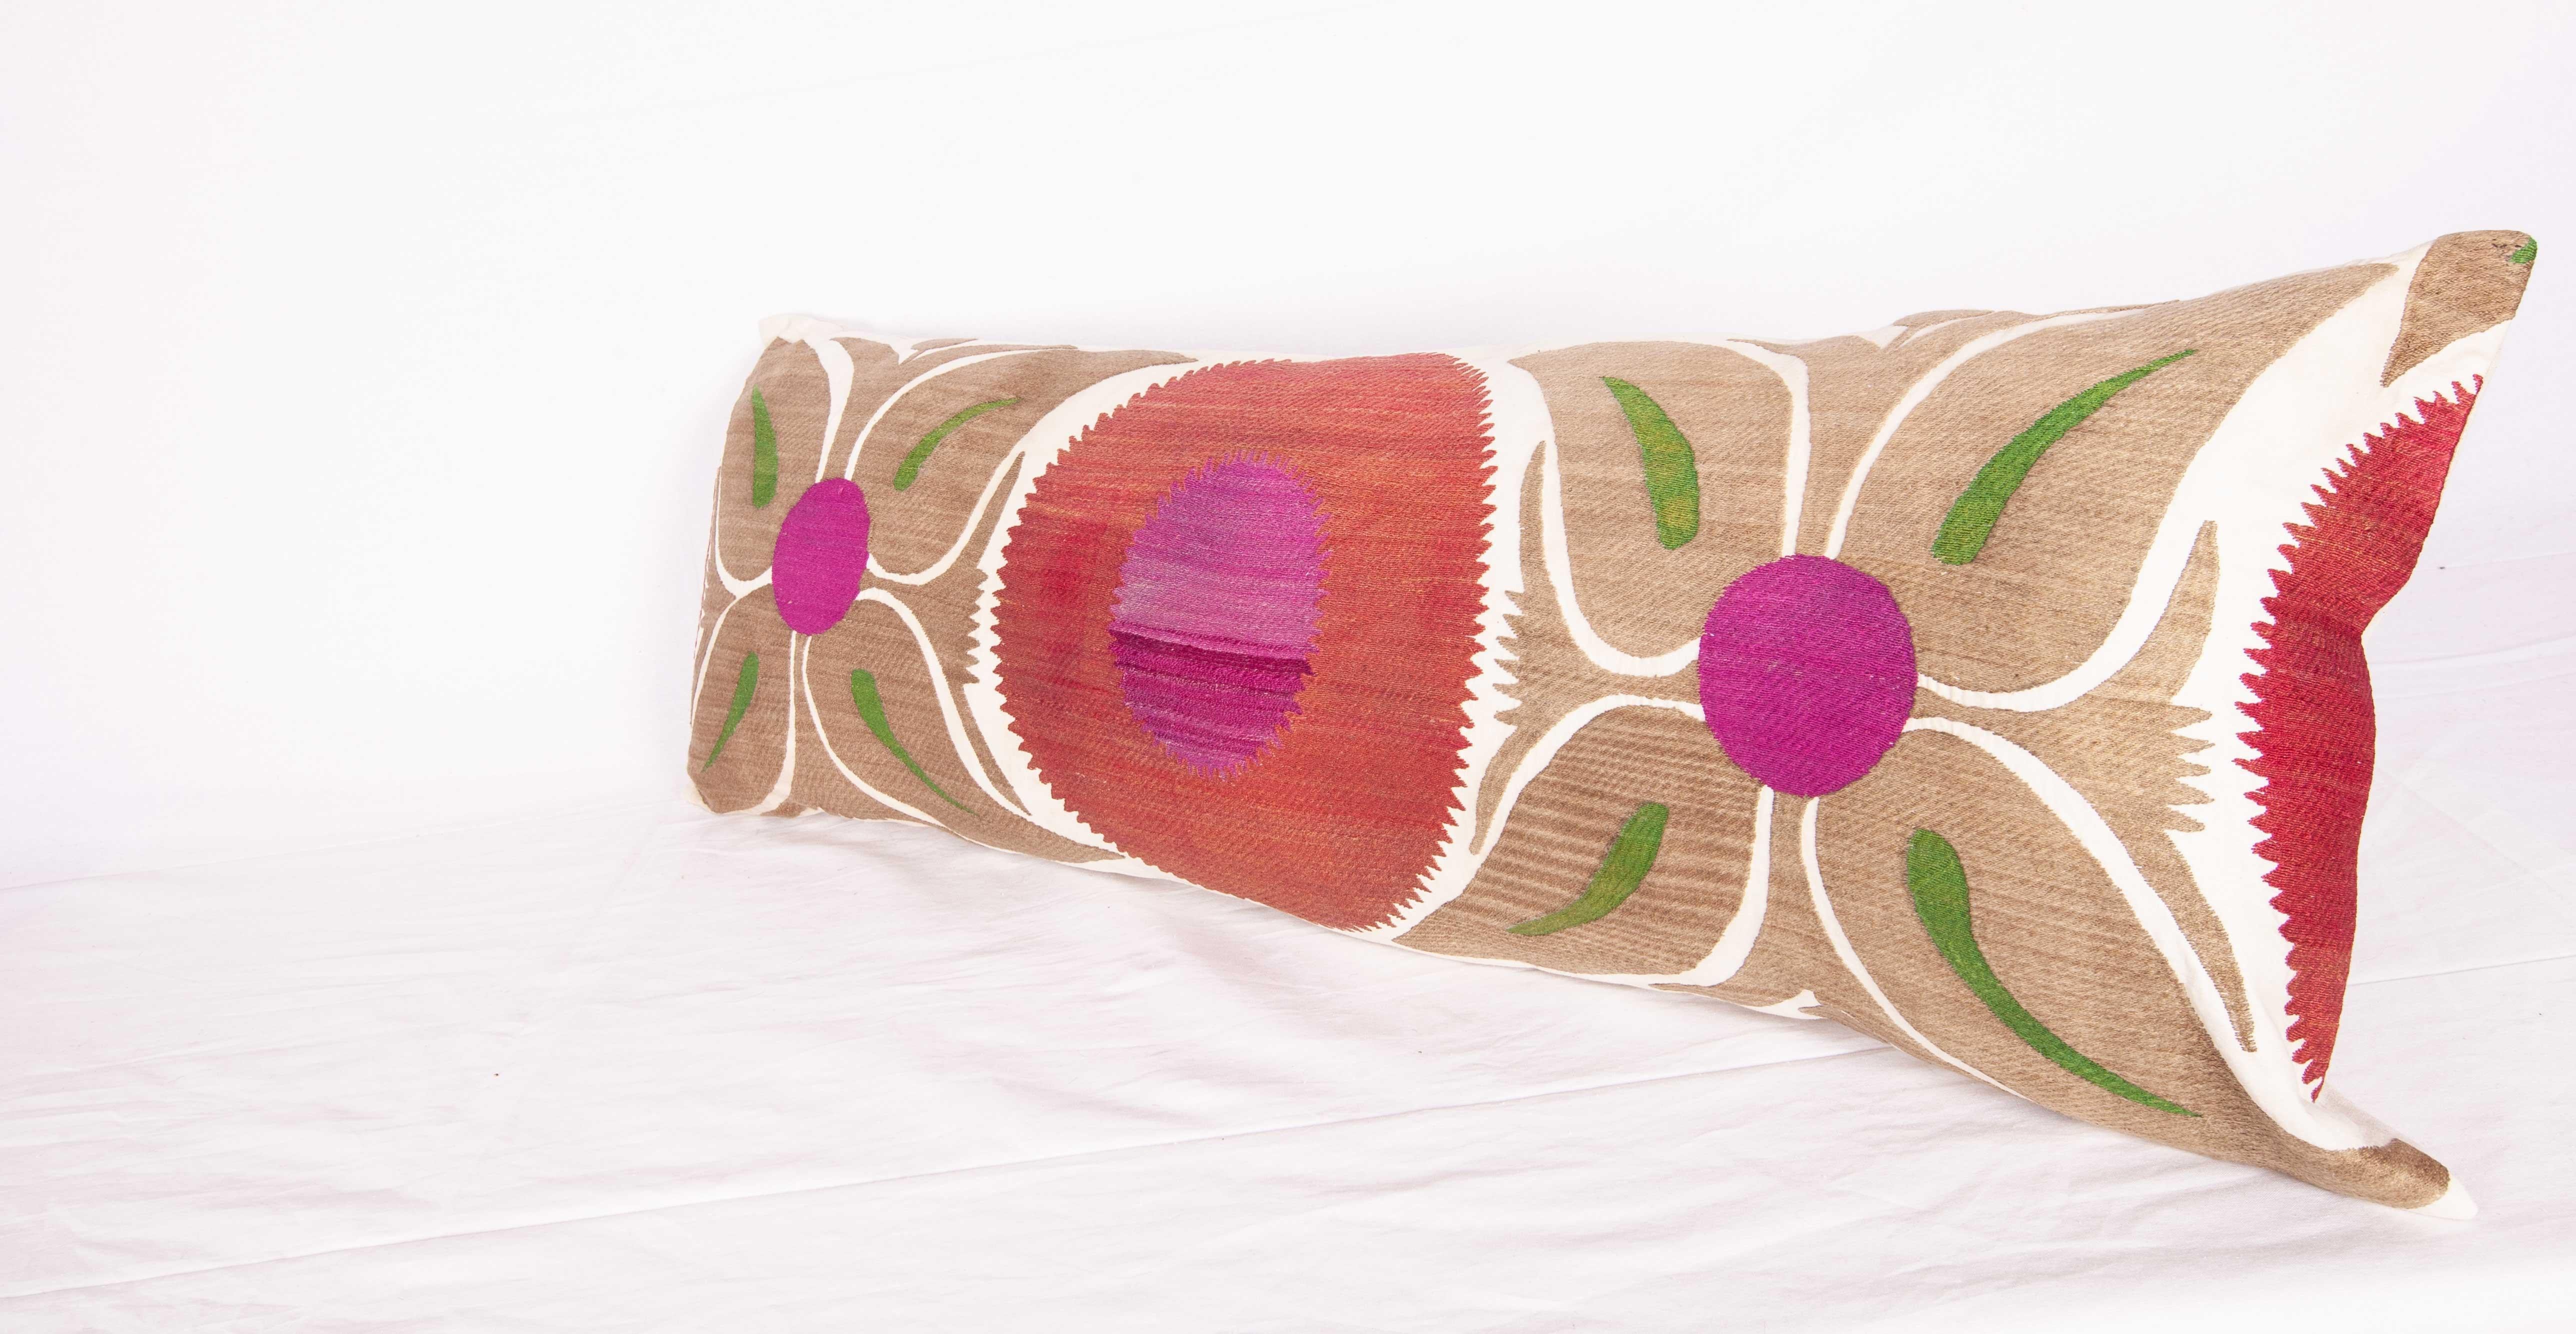 Cotton Old Suzani Pillow / Cushion Cover Fashioned from a Mid-20th Cenury Suzani